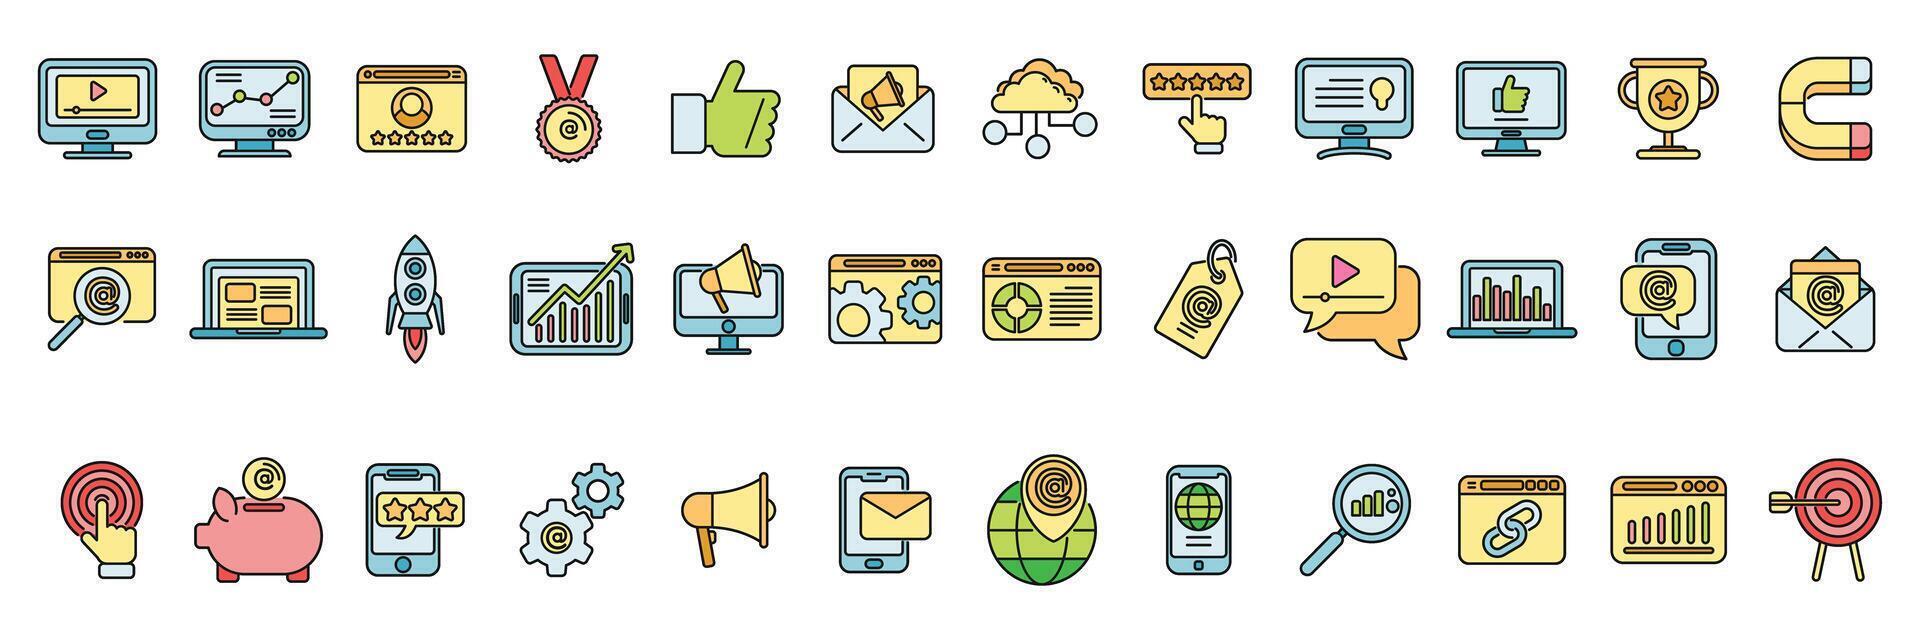 Online marketing icons set vector color